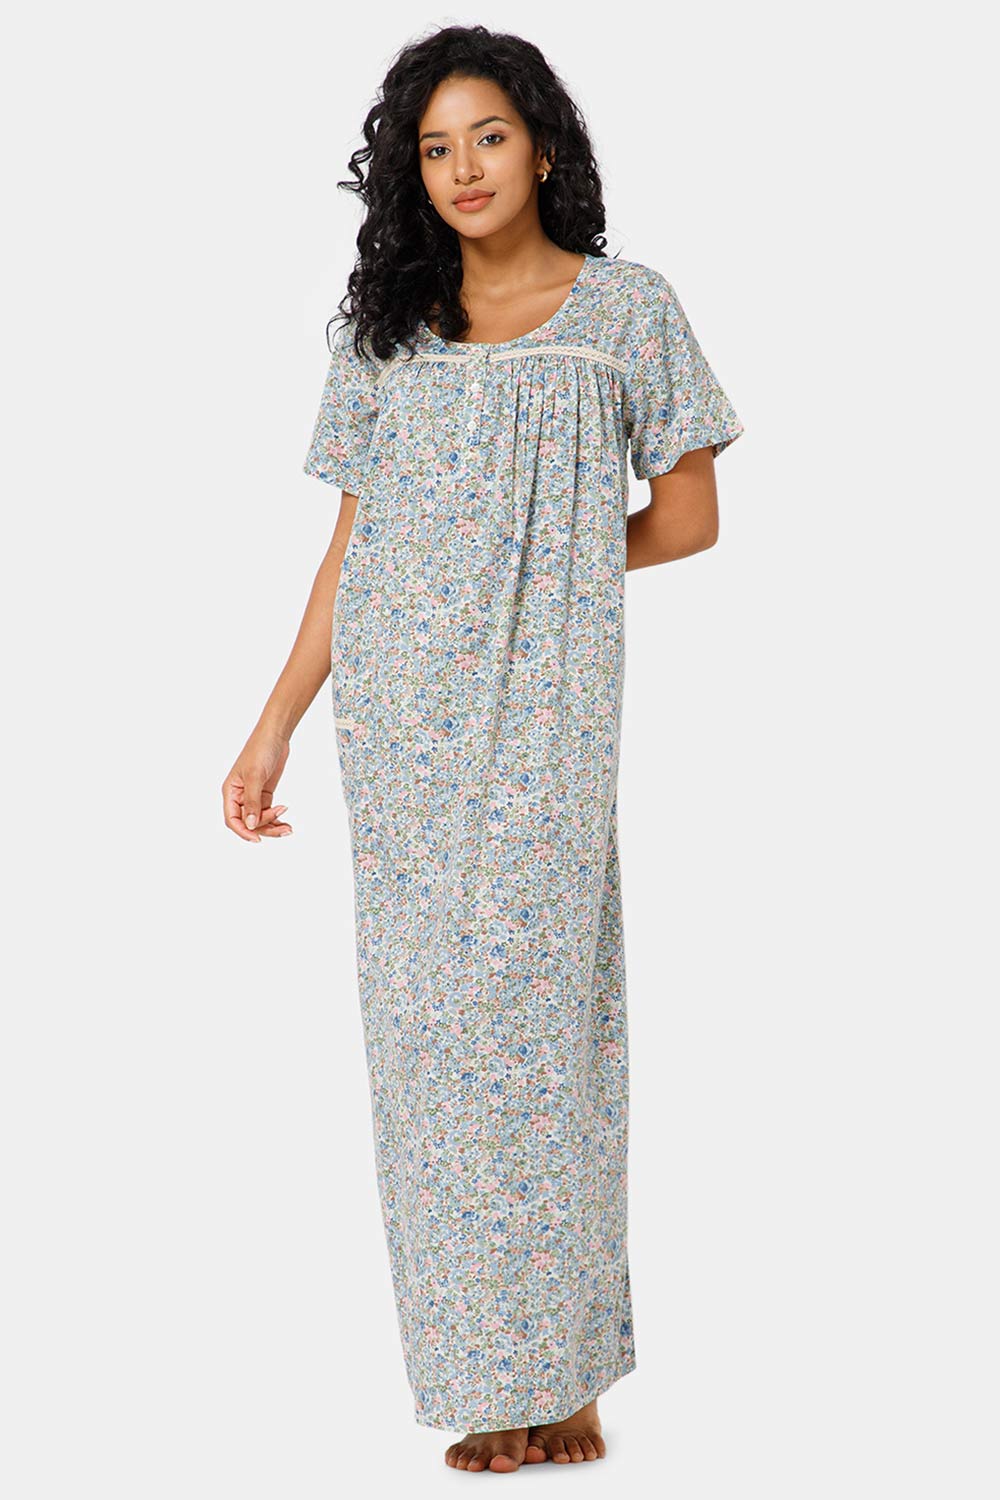 Naidu Hall Front Open Round Neck Short Sleeve Printed Nighty-Sky Blue - NT11